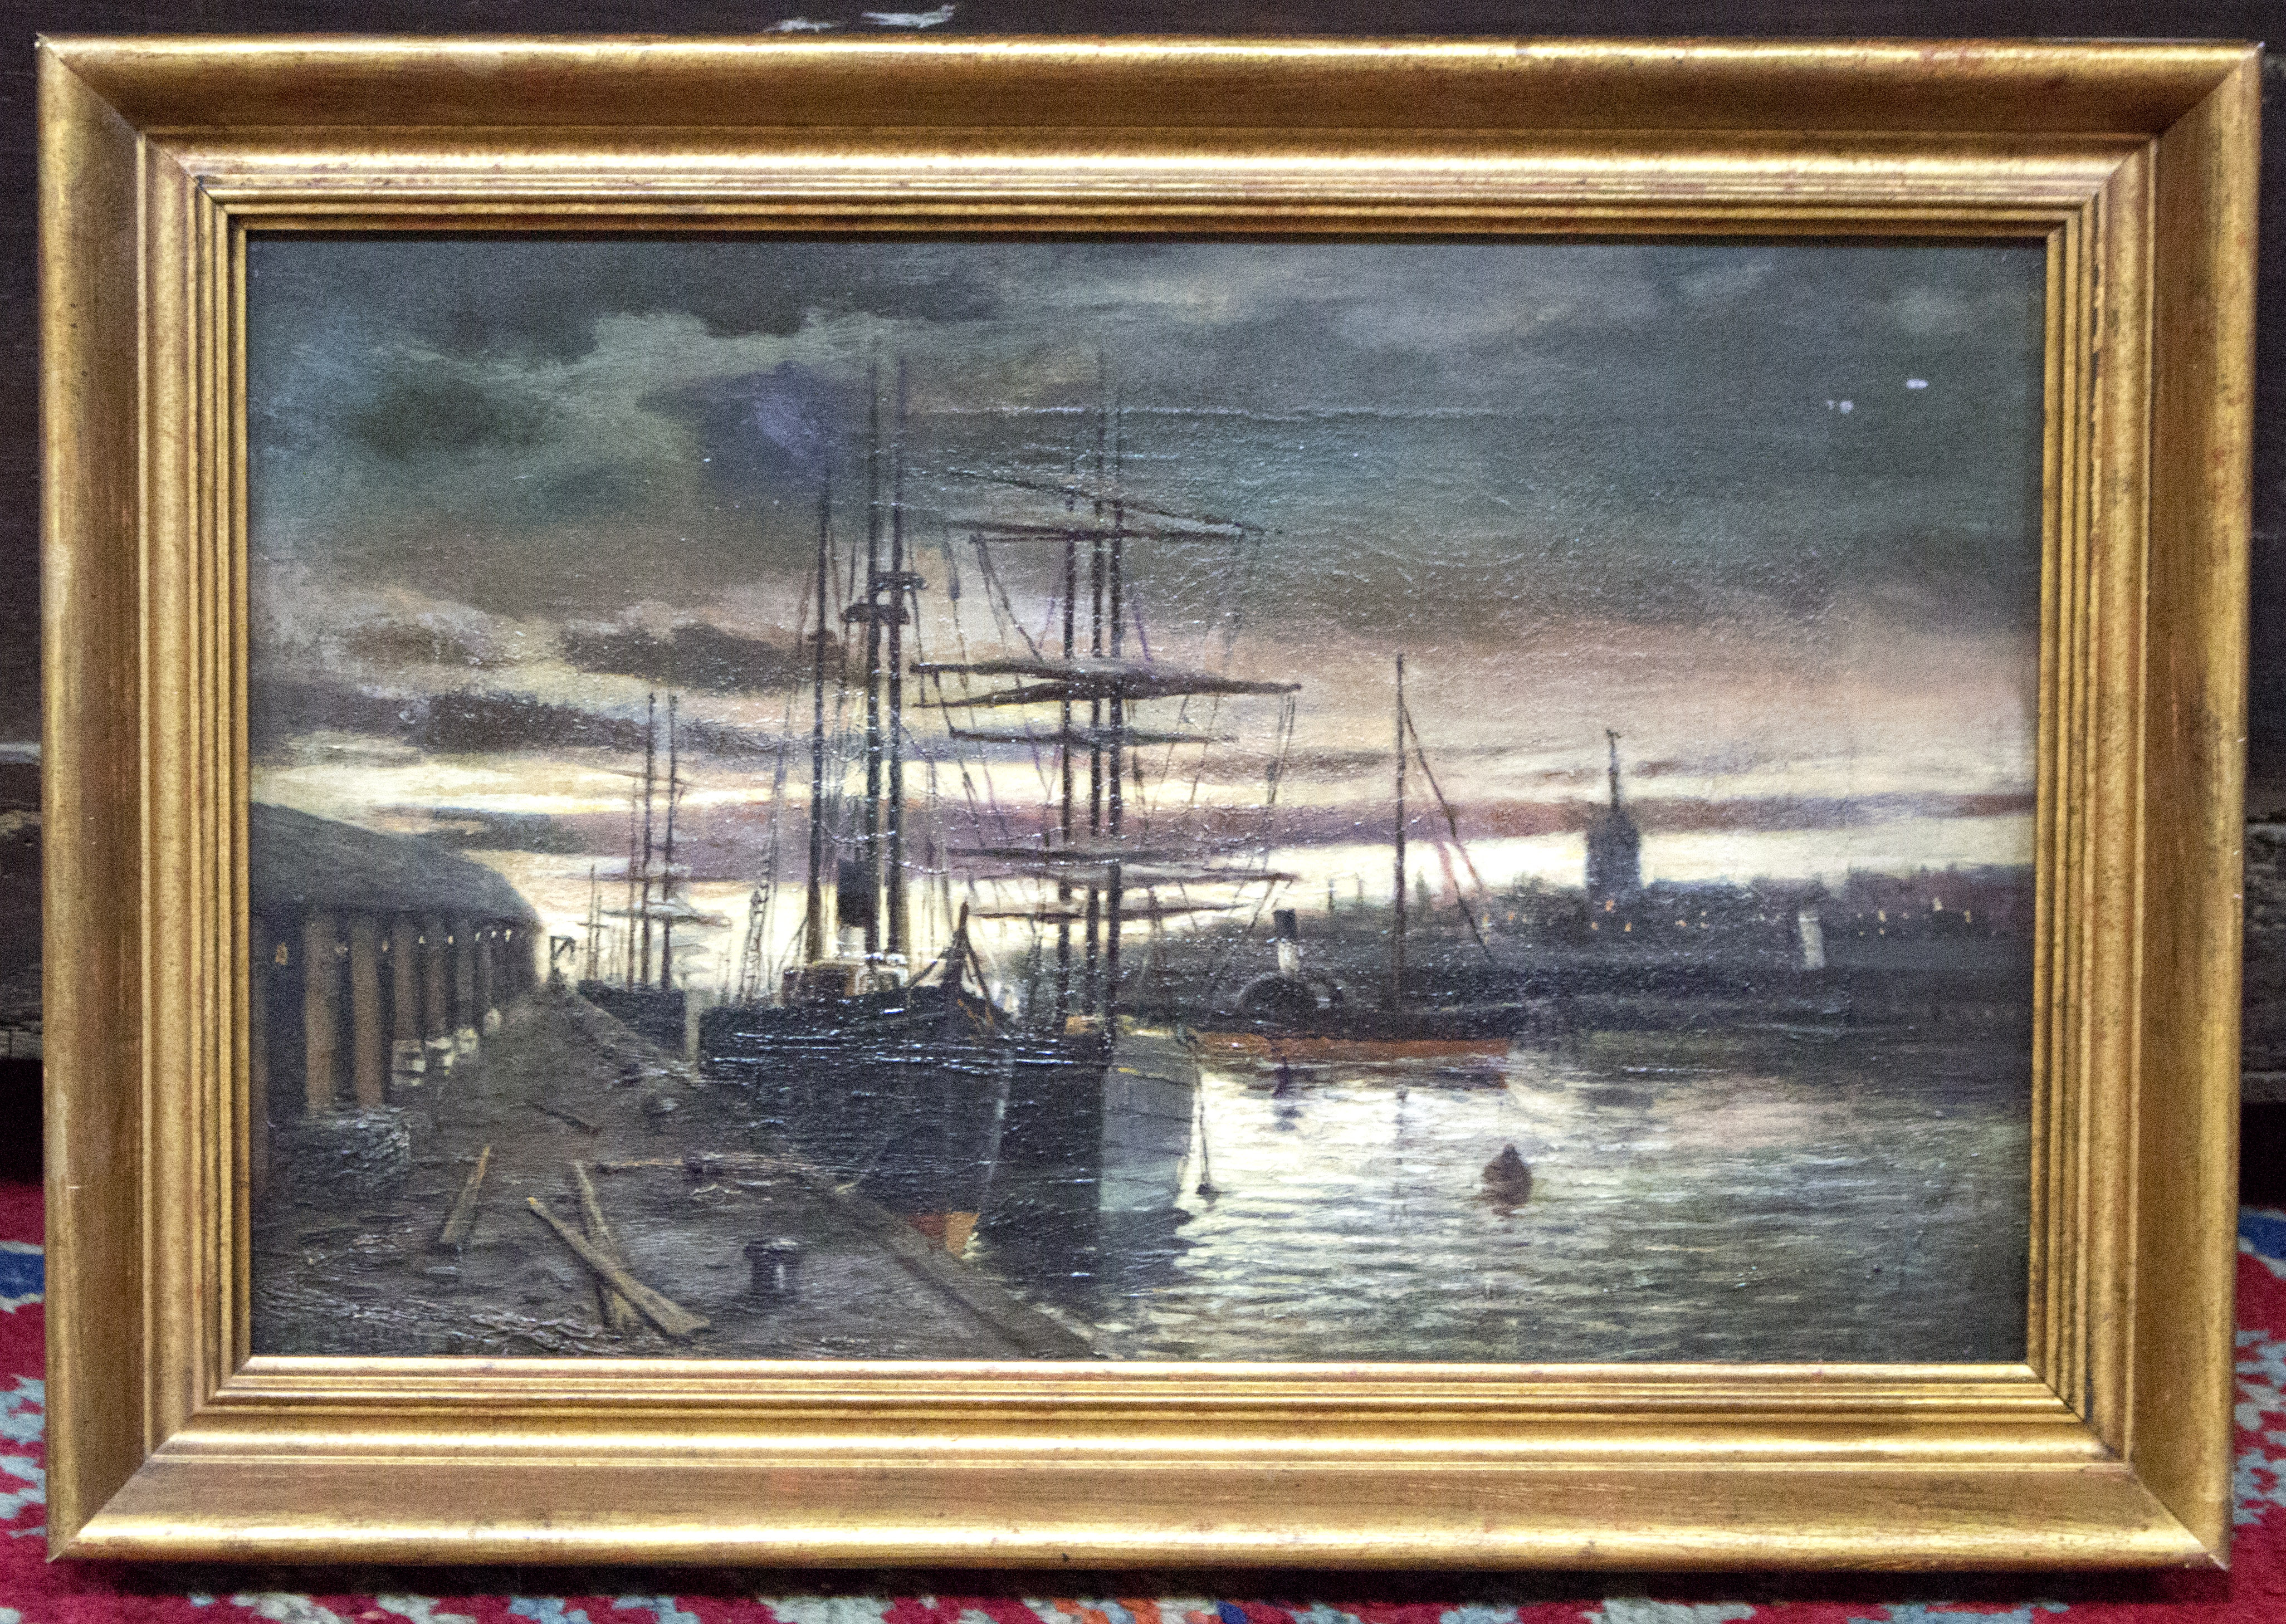 Scottish School, circa 1900/Ships in Harbour at Dusk/indistinctly signed McFarlane/oil on canvas, - Image 2 of 3